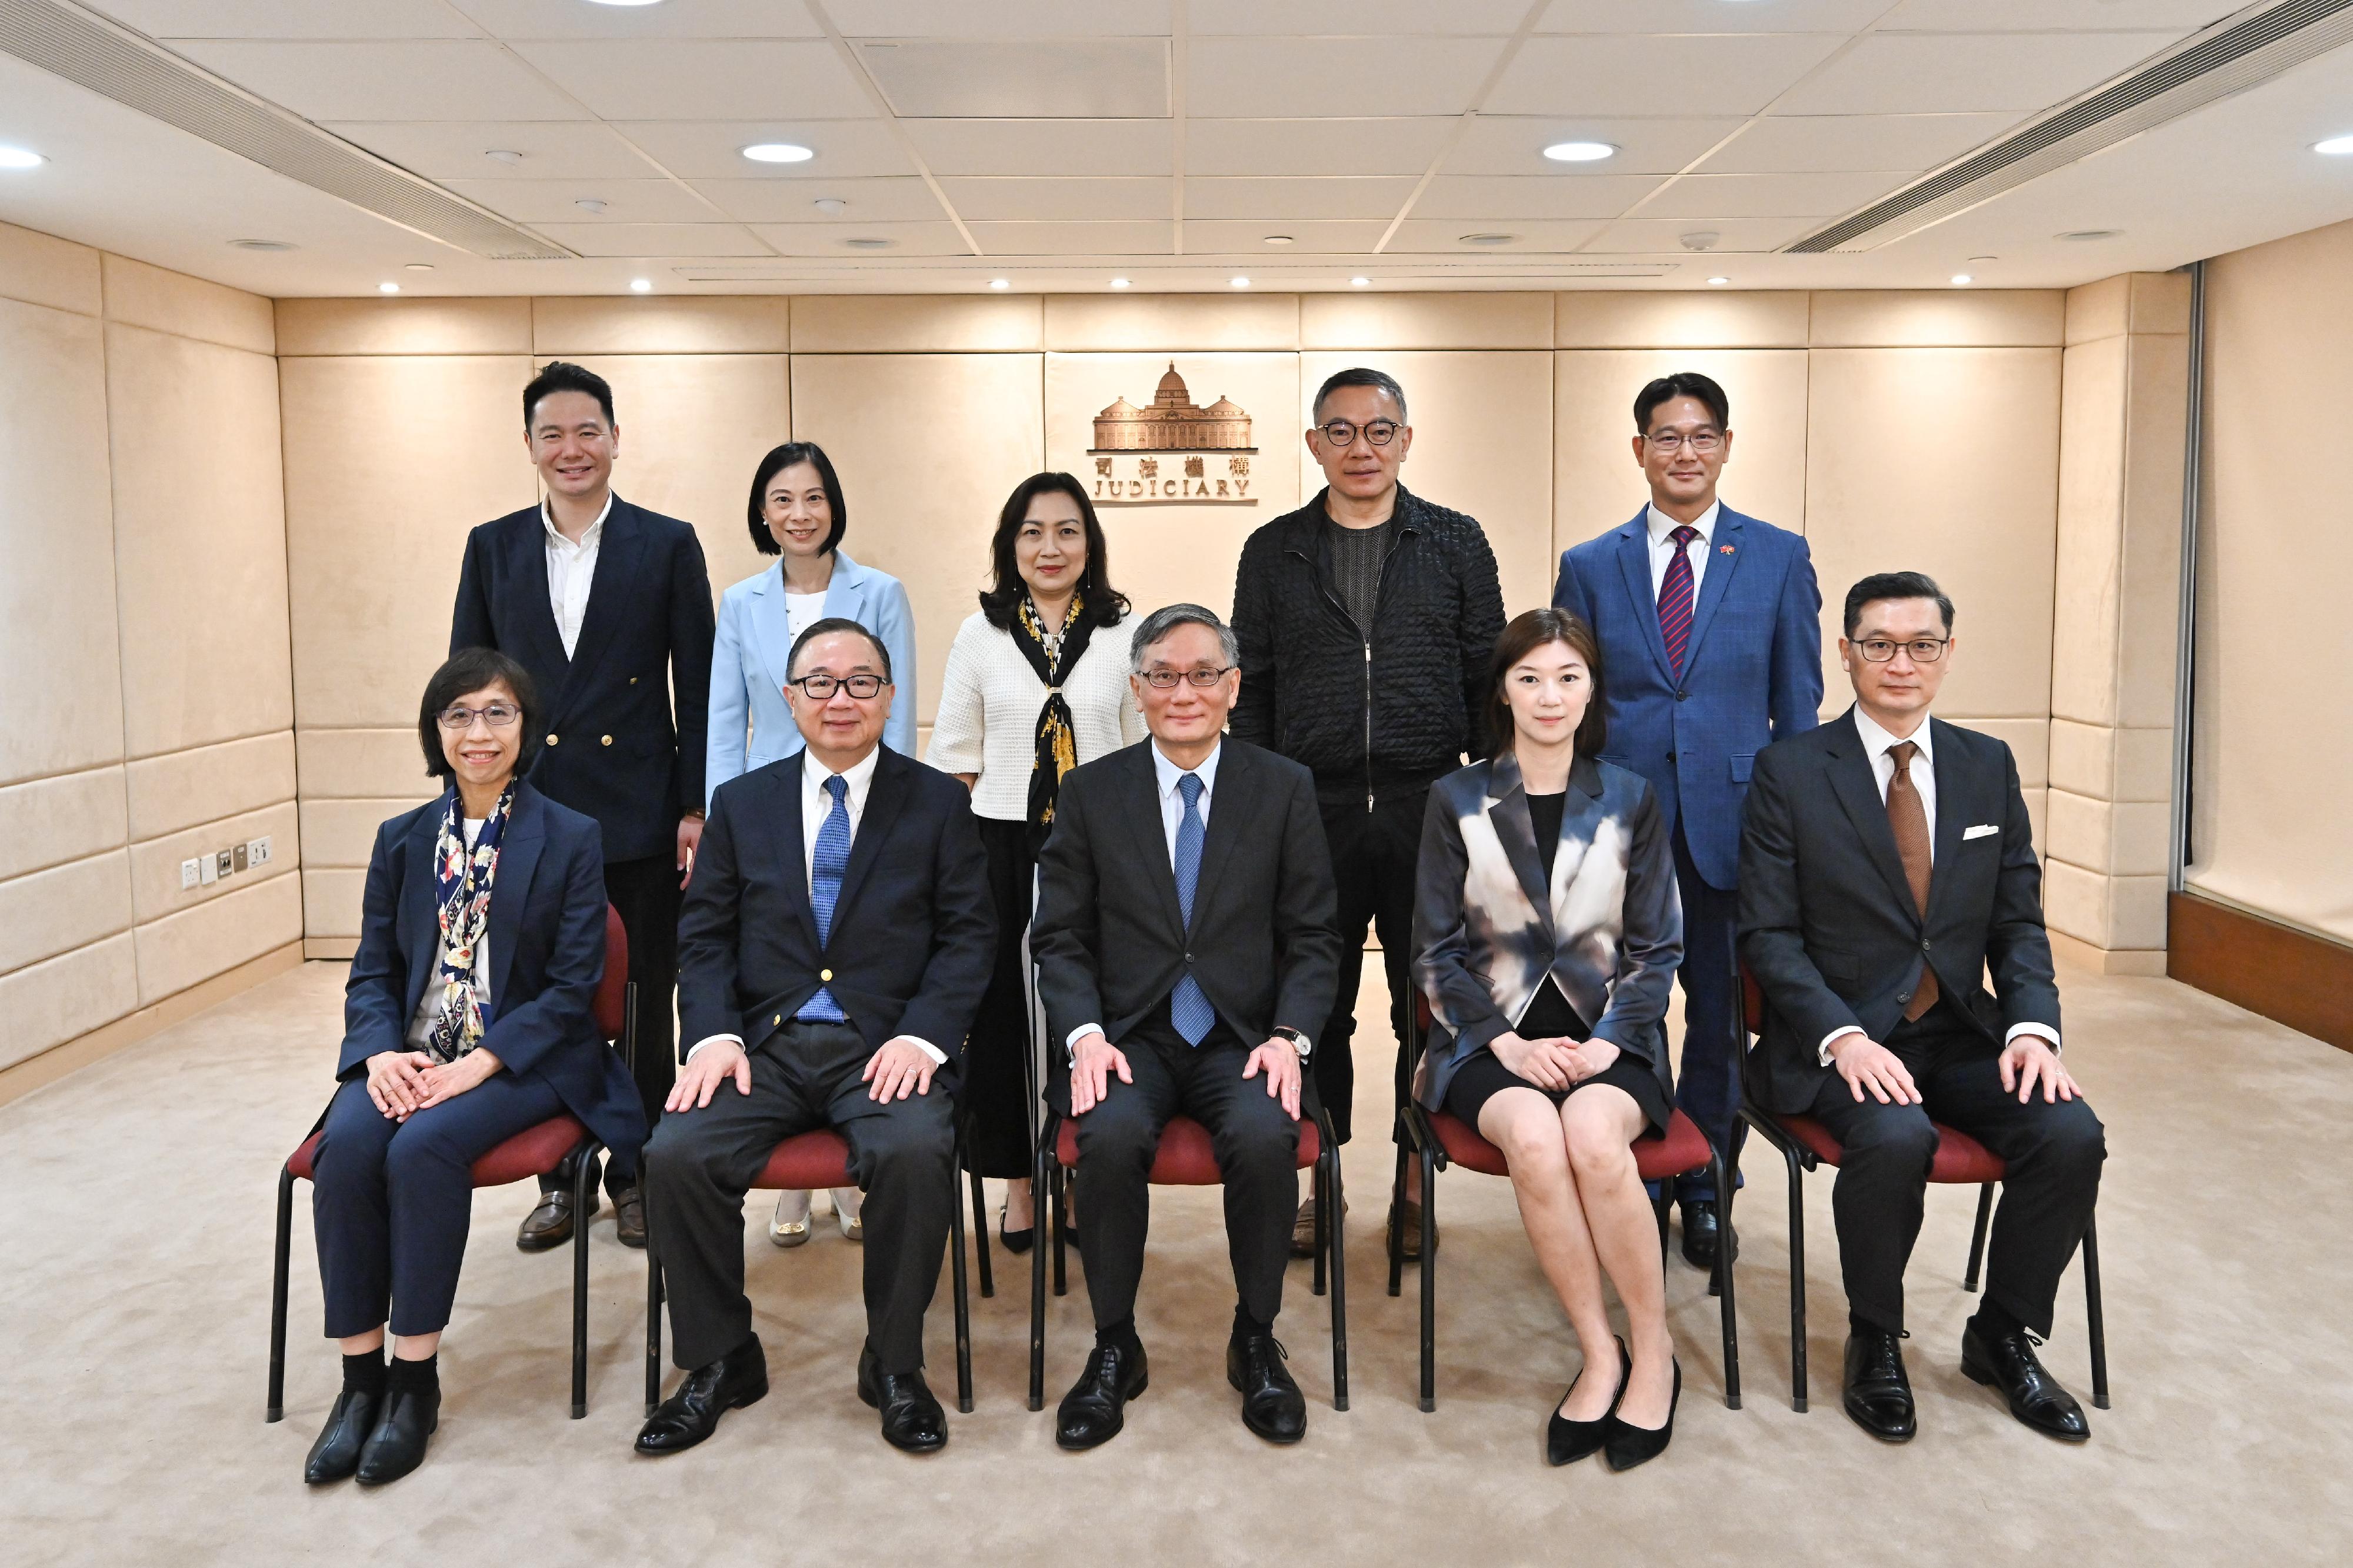 Members of the Legislative Council (LegCo) Panel on Administration of Justice and Legal Services today (June 2) visited the High Court Building and met with members of the Judiciary to exchange views on topical issues relating to the administration of justice. Photo shows (front row, from left) the Judiciary Administrator, Ms Esther Leung Yuet-yin; the Chairman of the LegCo Panel on Administration of Justice and Legal Services, Mr Martin Liao; the Chief Justice of the Court of Final Appeal, Mr Andrew Cheung Kui-nung; the Deputy Chairman of the LegCo Panel on Administration of Justice and Legal Services, Ms Yung Hoi-yan; the Chief Judge of the High Court, Mr Justice Jeremy Poon Shiu-chor; and Panel members (back row, from left) Mr Holden Chow, Ms Maggie Chan, Ms Carmen Kan, Mr Paul Tse and Mr Dennis Leung.